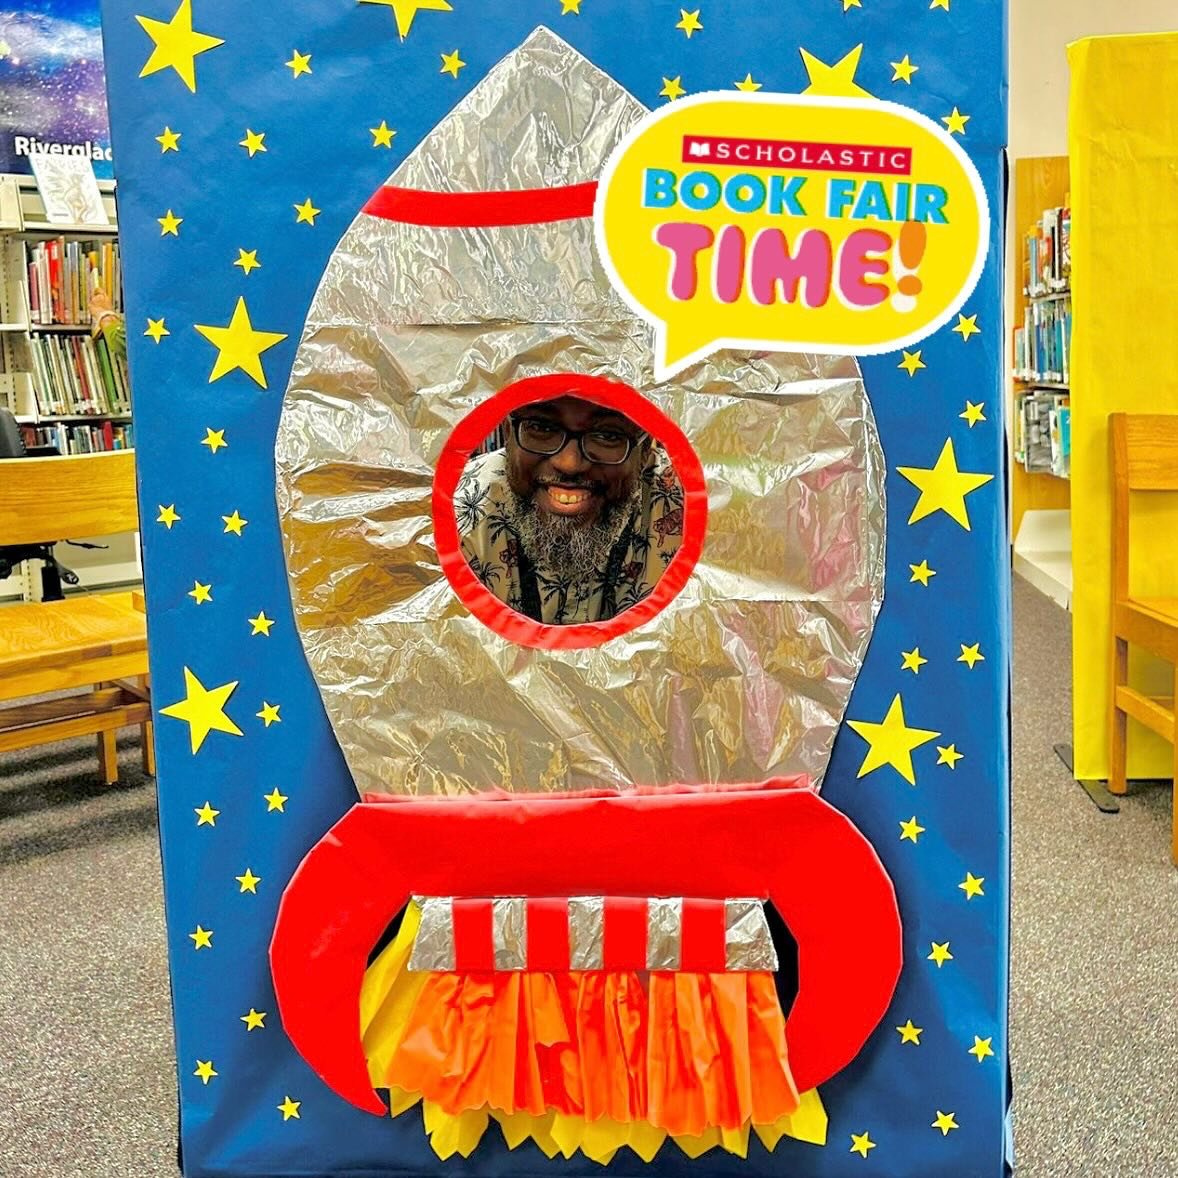 Mr. Duhart is here giving us a sneak peek into this spring&rsquo;s space travel-themed Book Fair&hellip; because reading is out of this world! Book Fair starts Friday! Ask your teacher when your child&rsquo;s class will visit. For more details and in